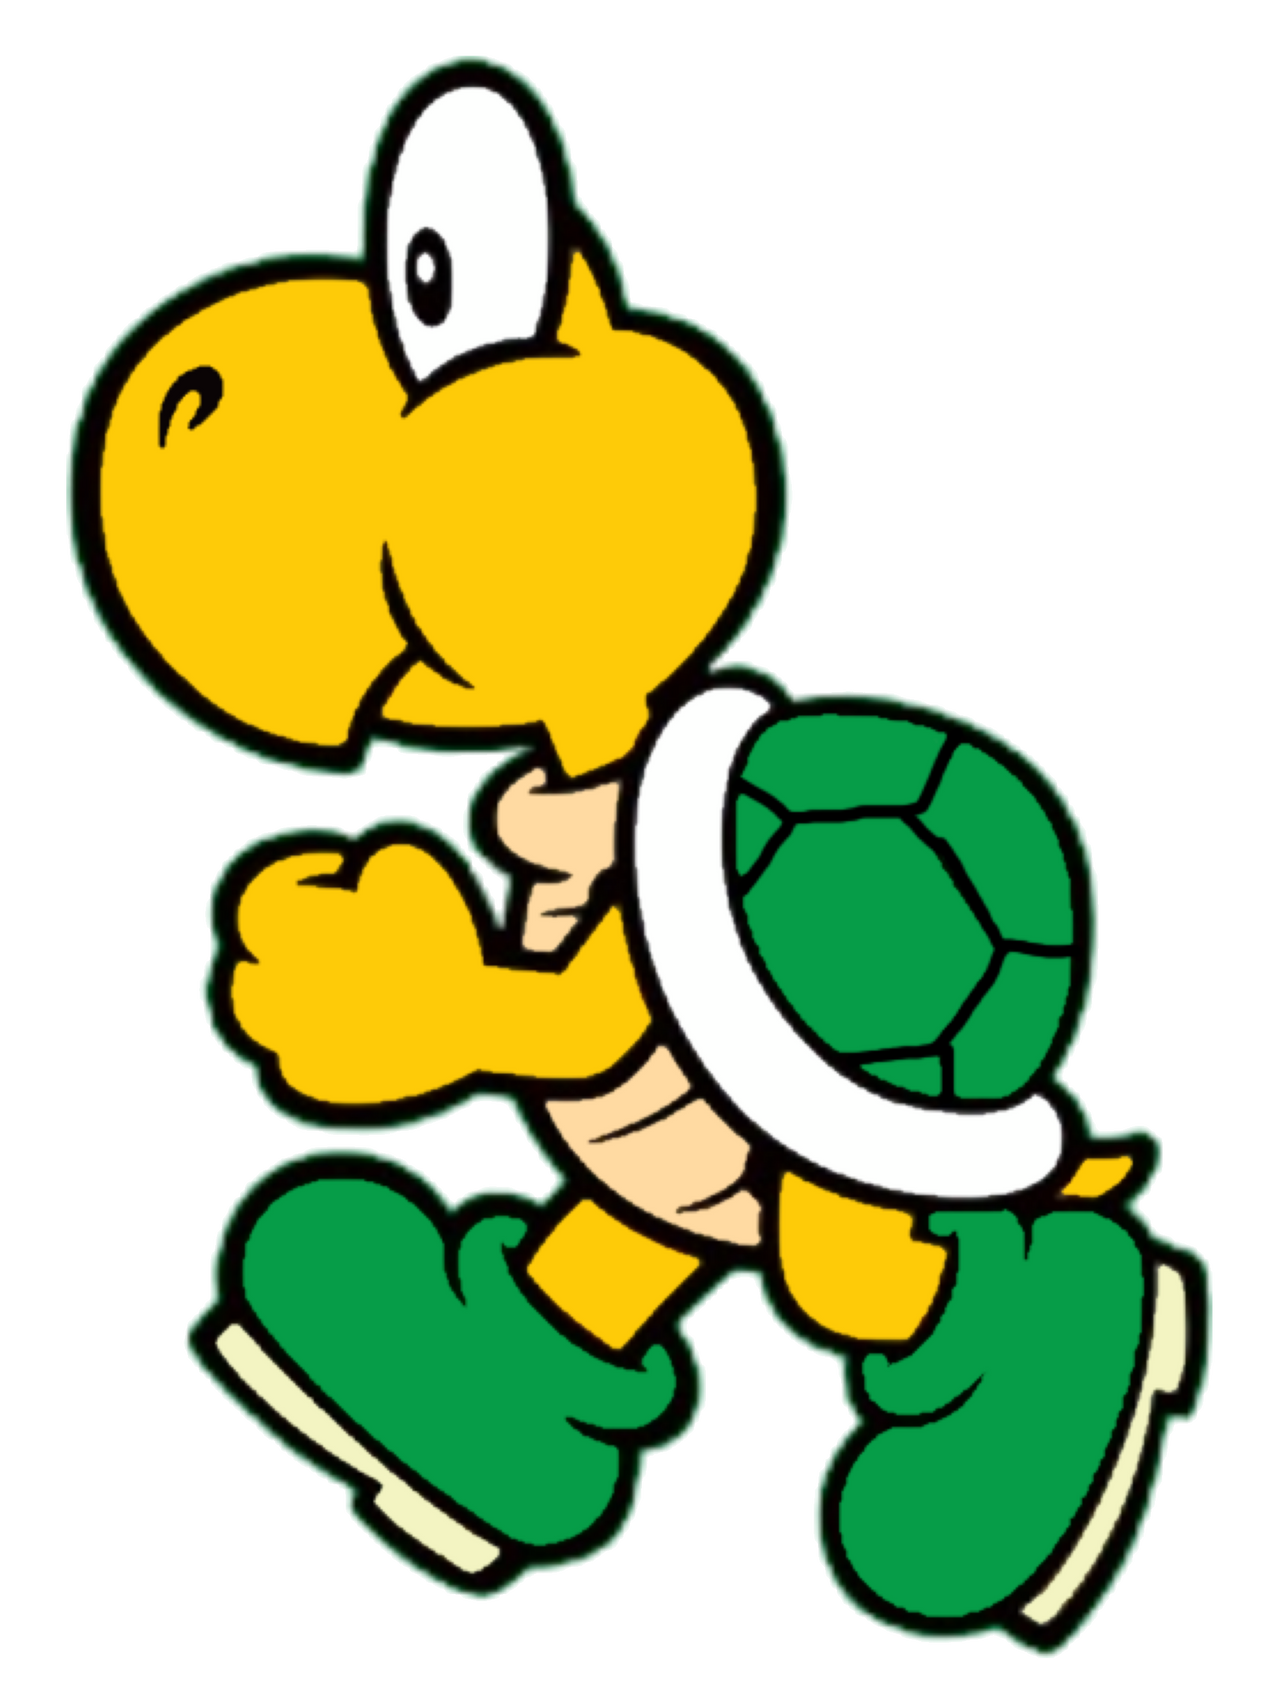 Koopa Troopa From Super Mario Bros Game Art Game Art Hq | Images and ...